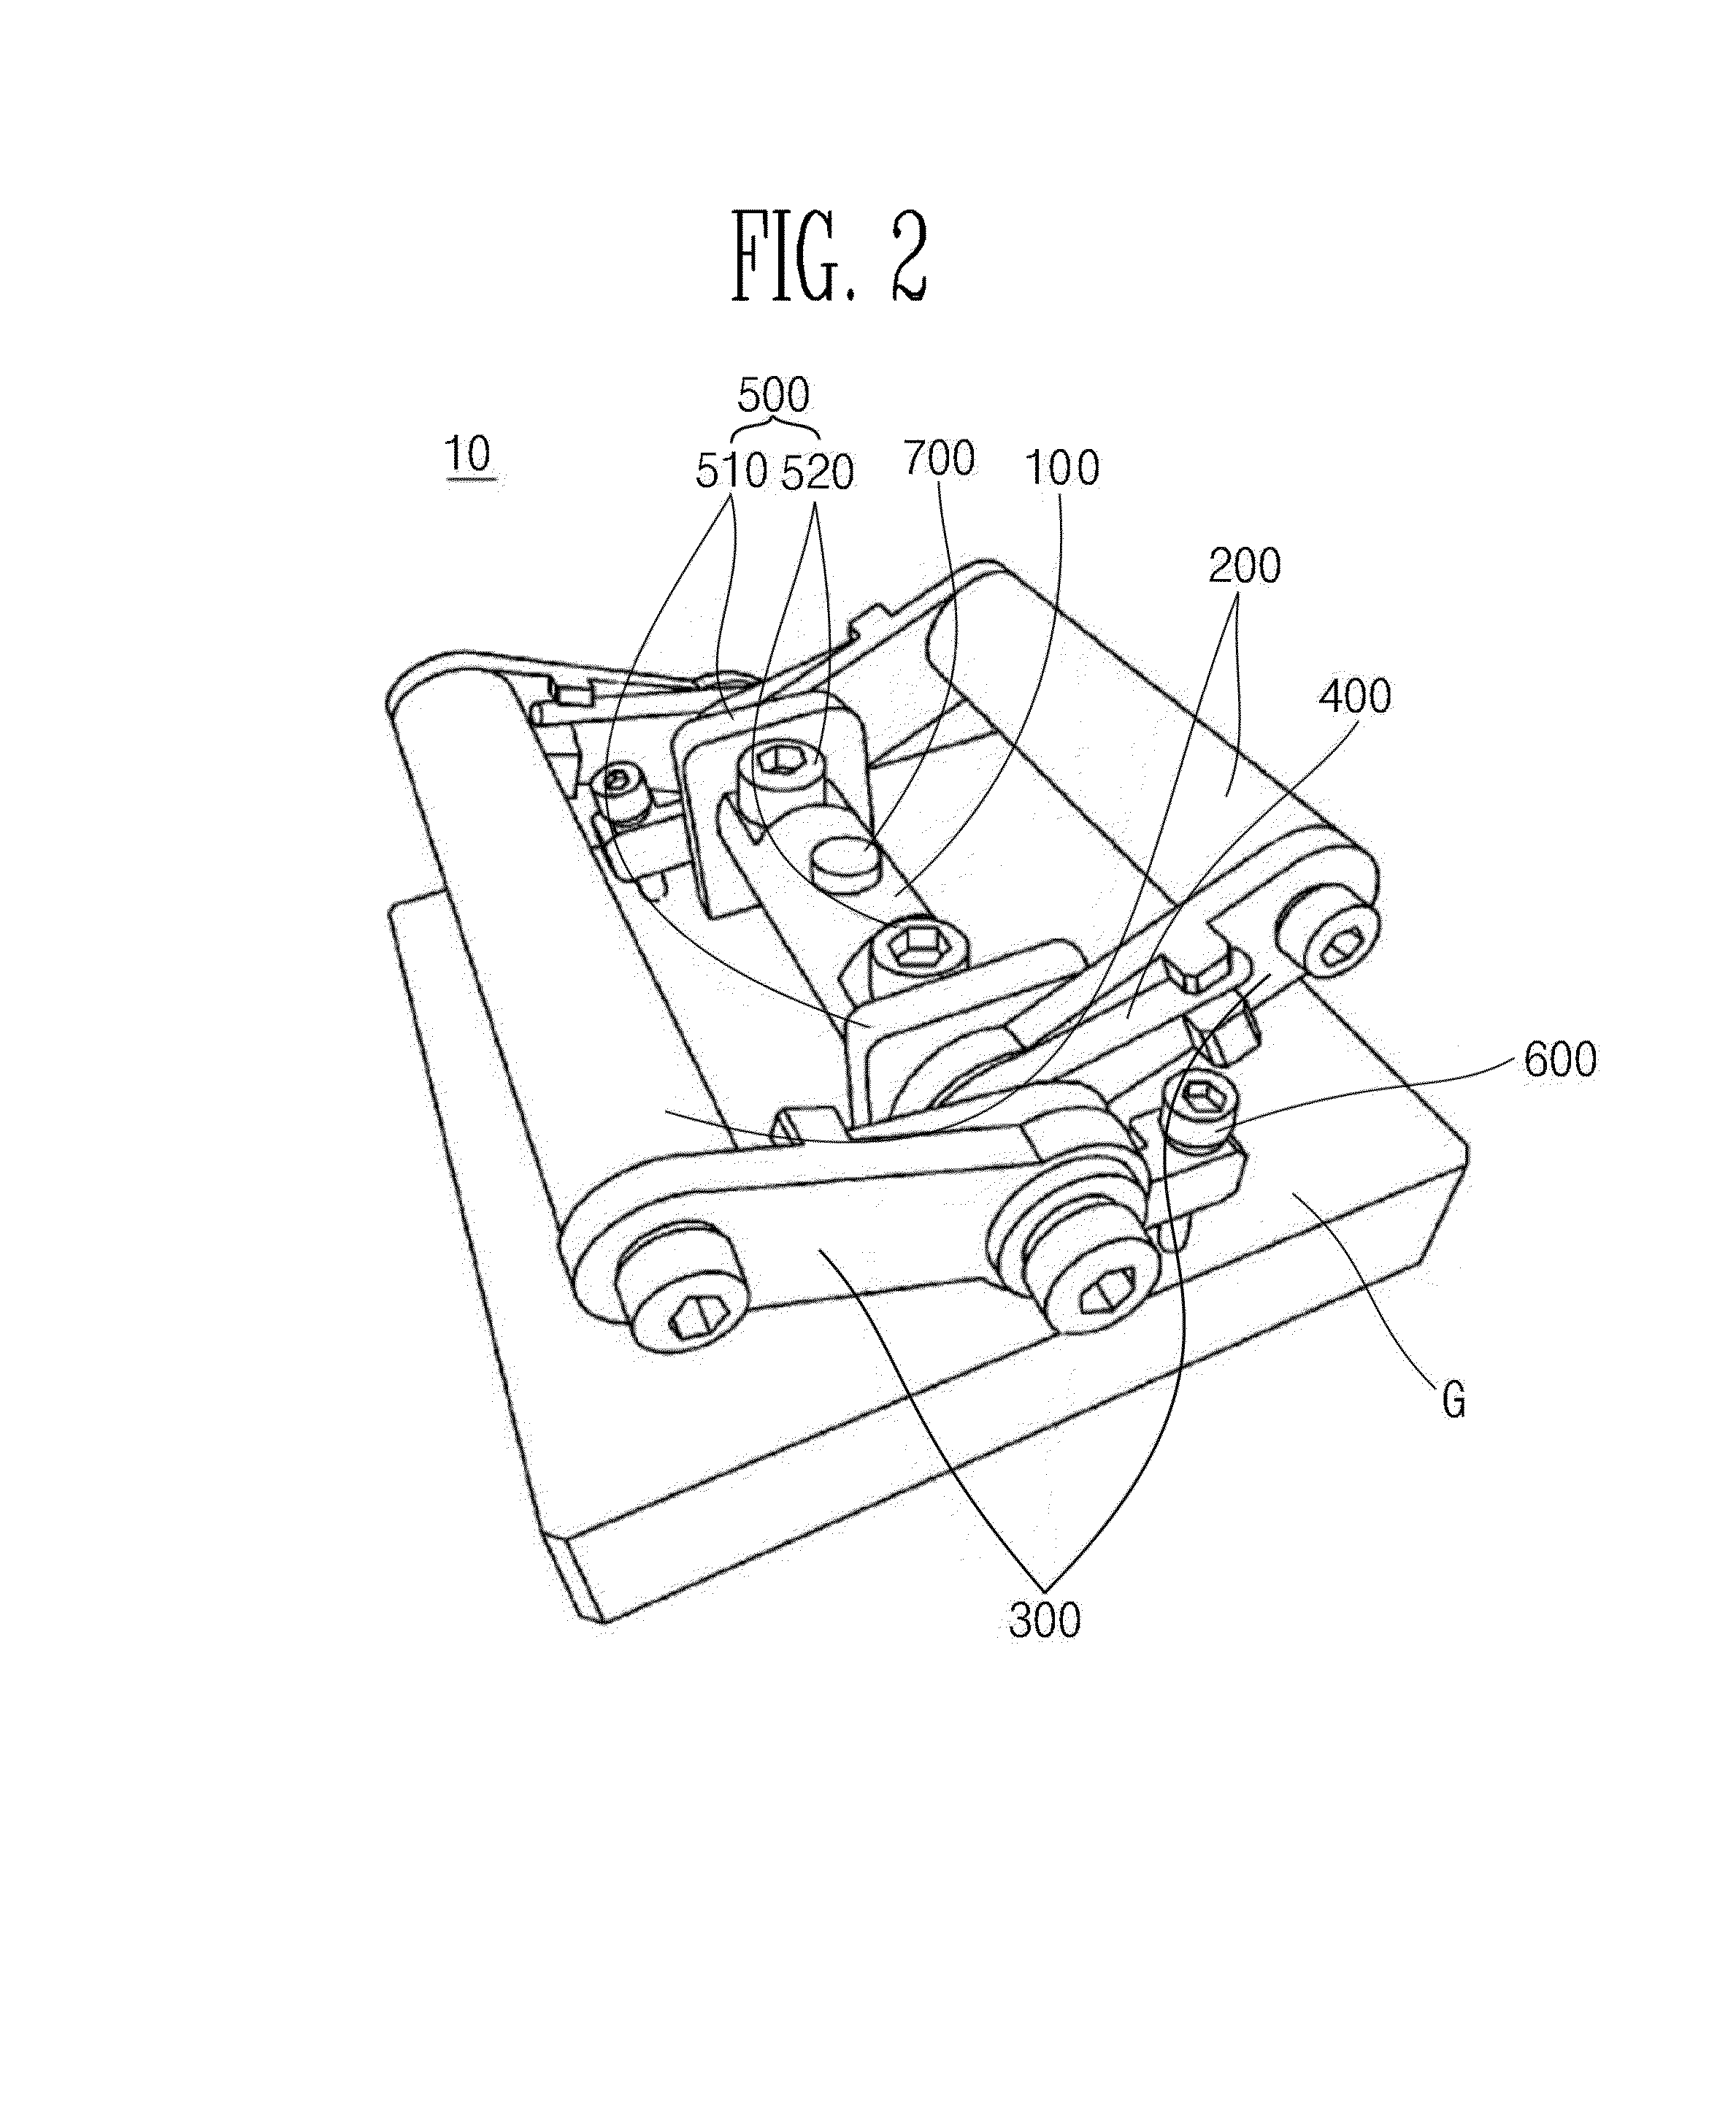 Guide frame support device